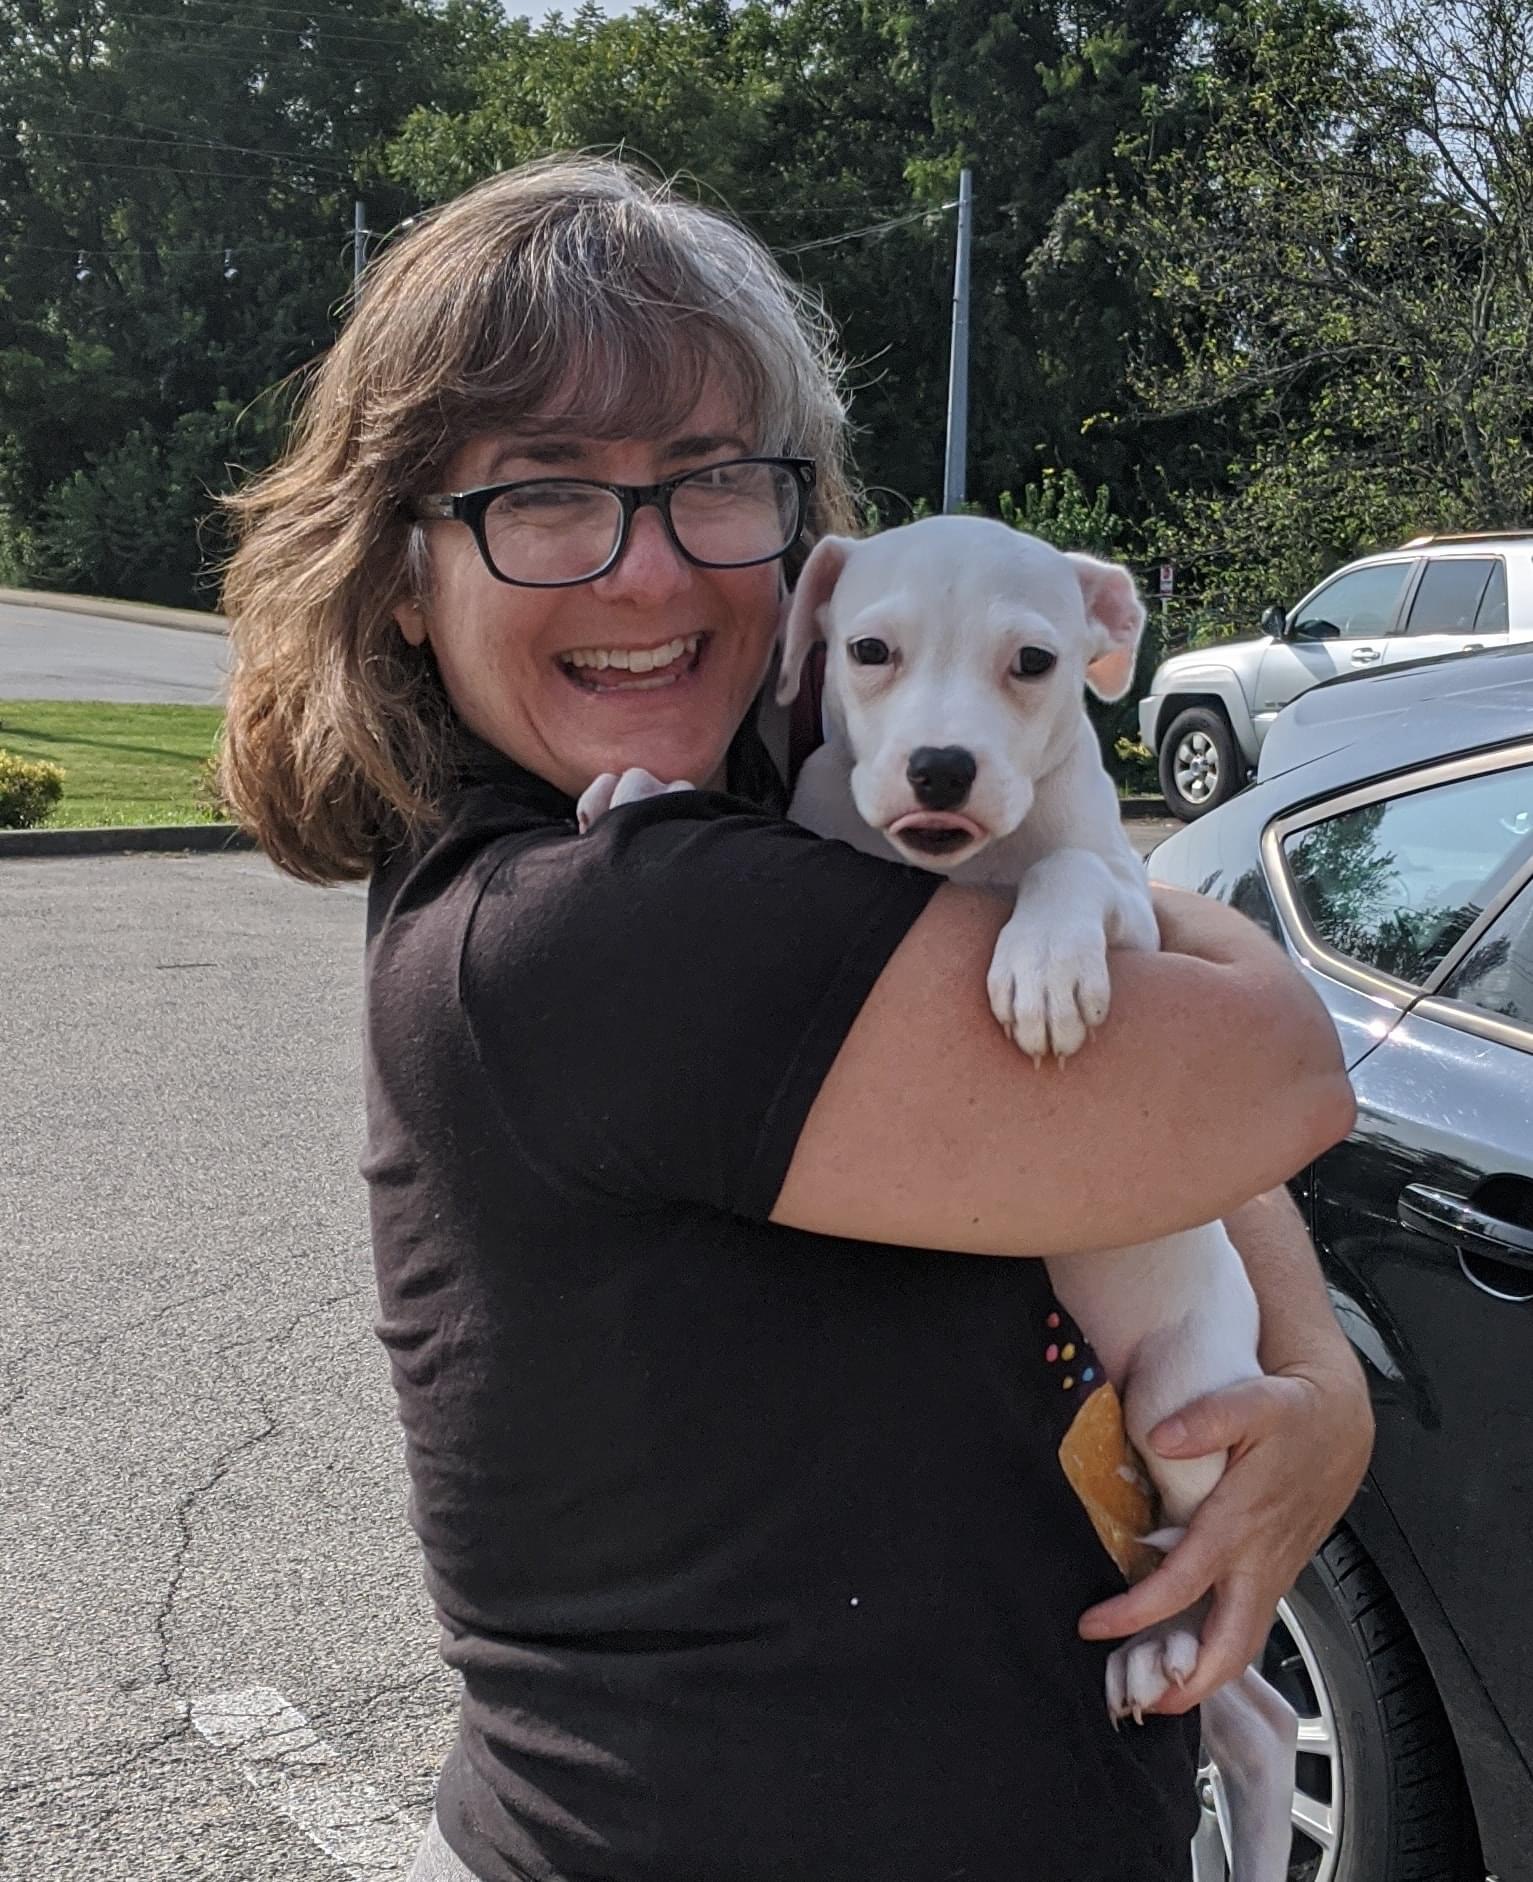 Tami holding an Adopted Pit Bull pup with a future hope of therapy dog potential.